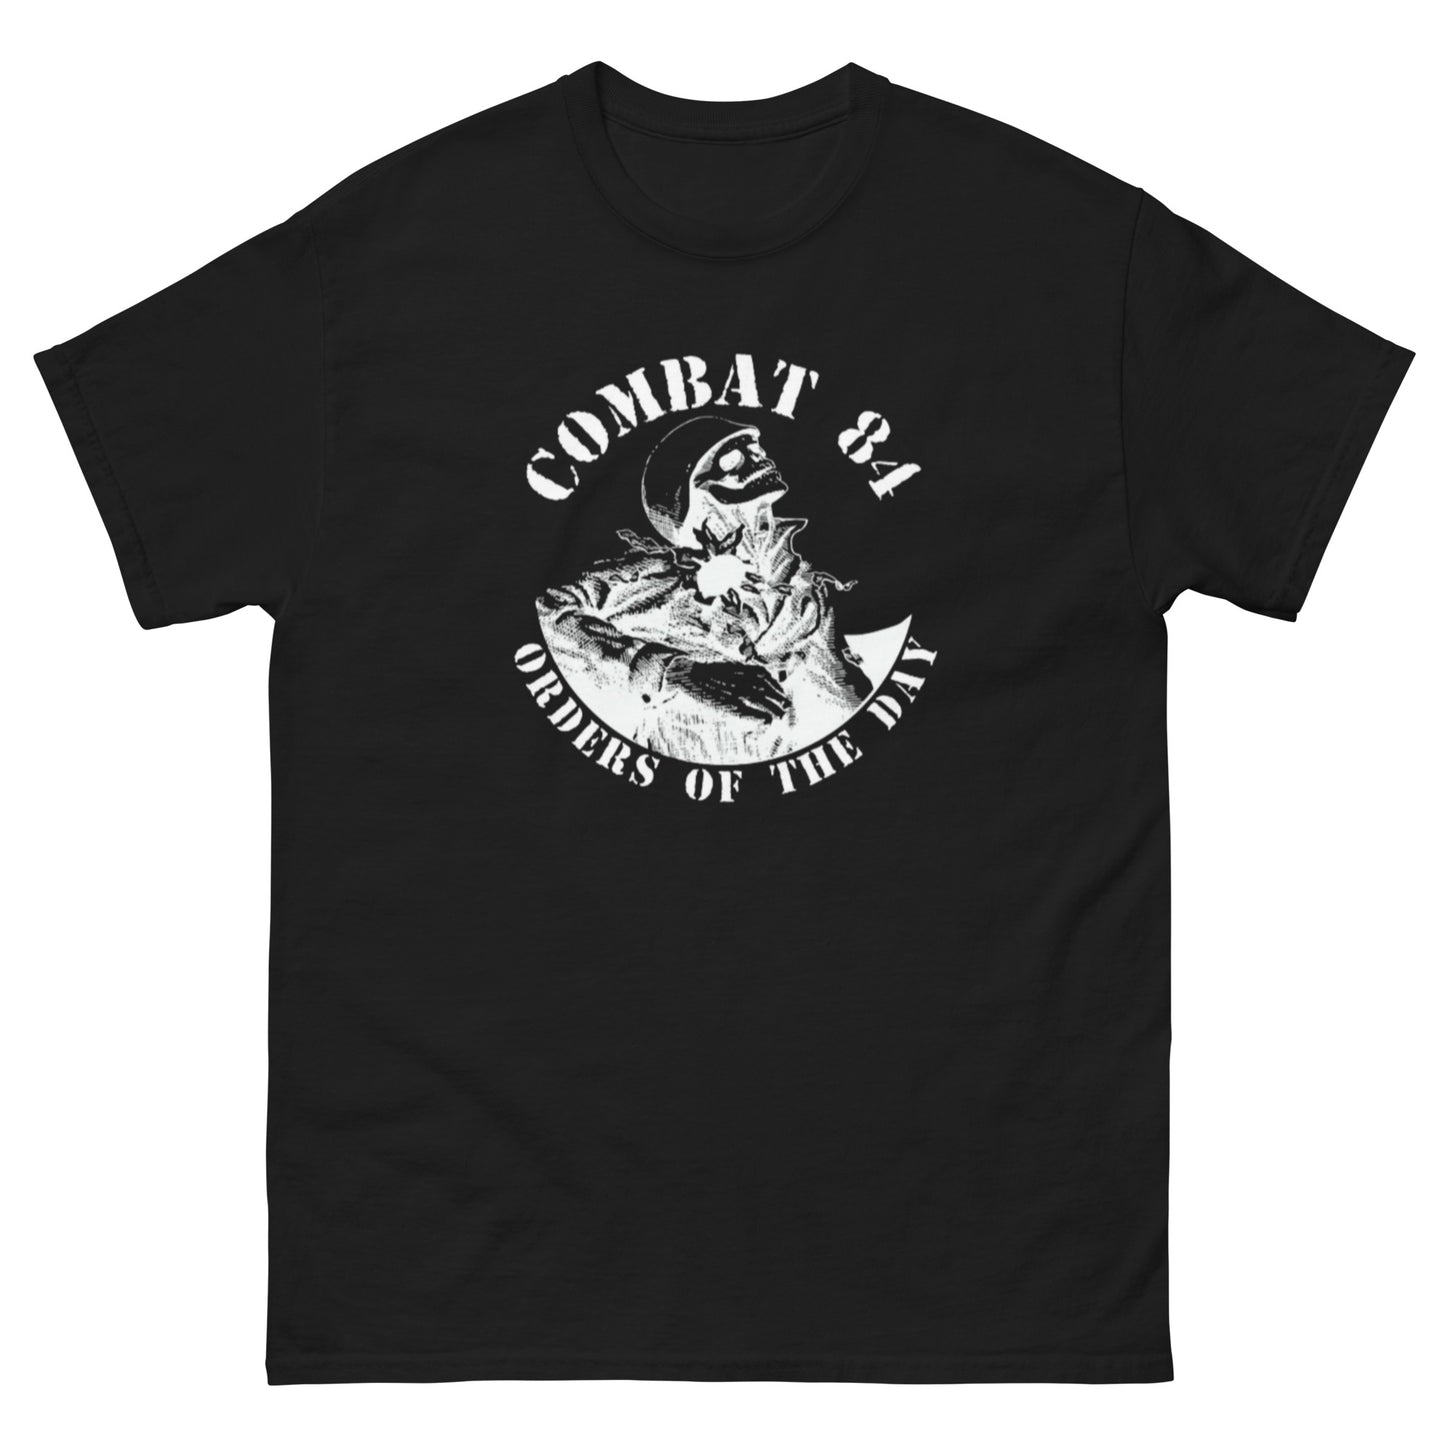 Oi - Combat 84 - Orders Of The Day Tee